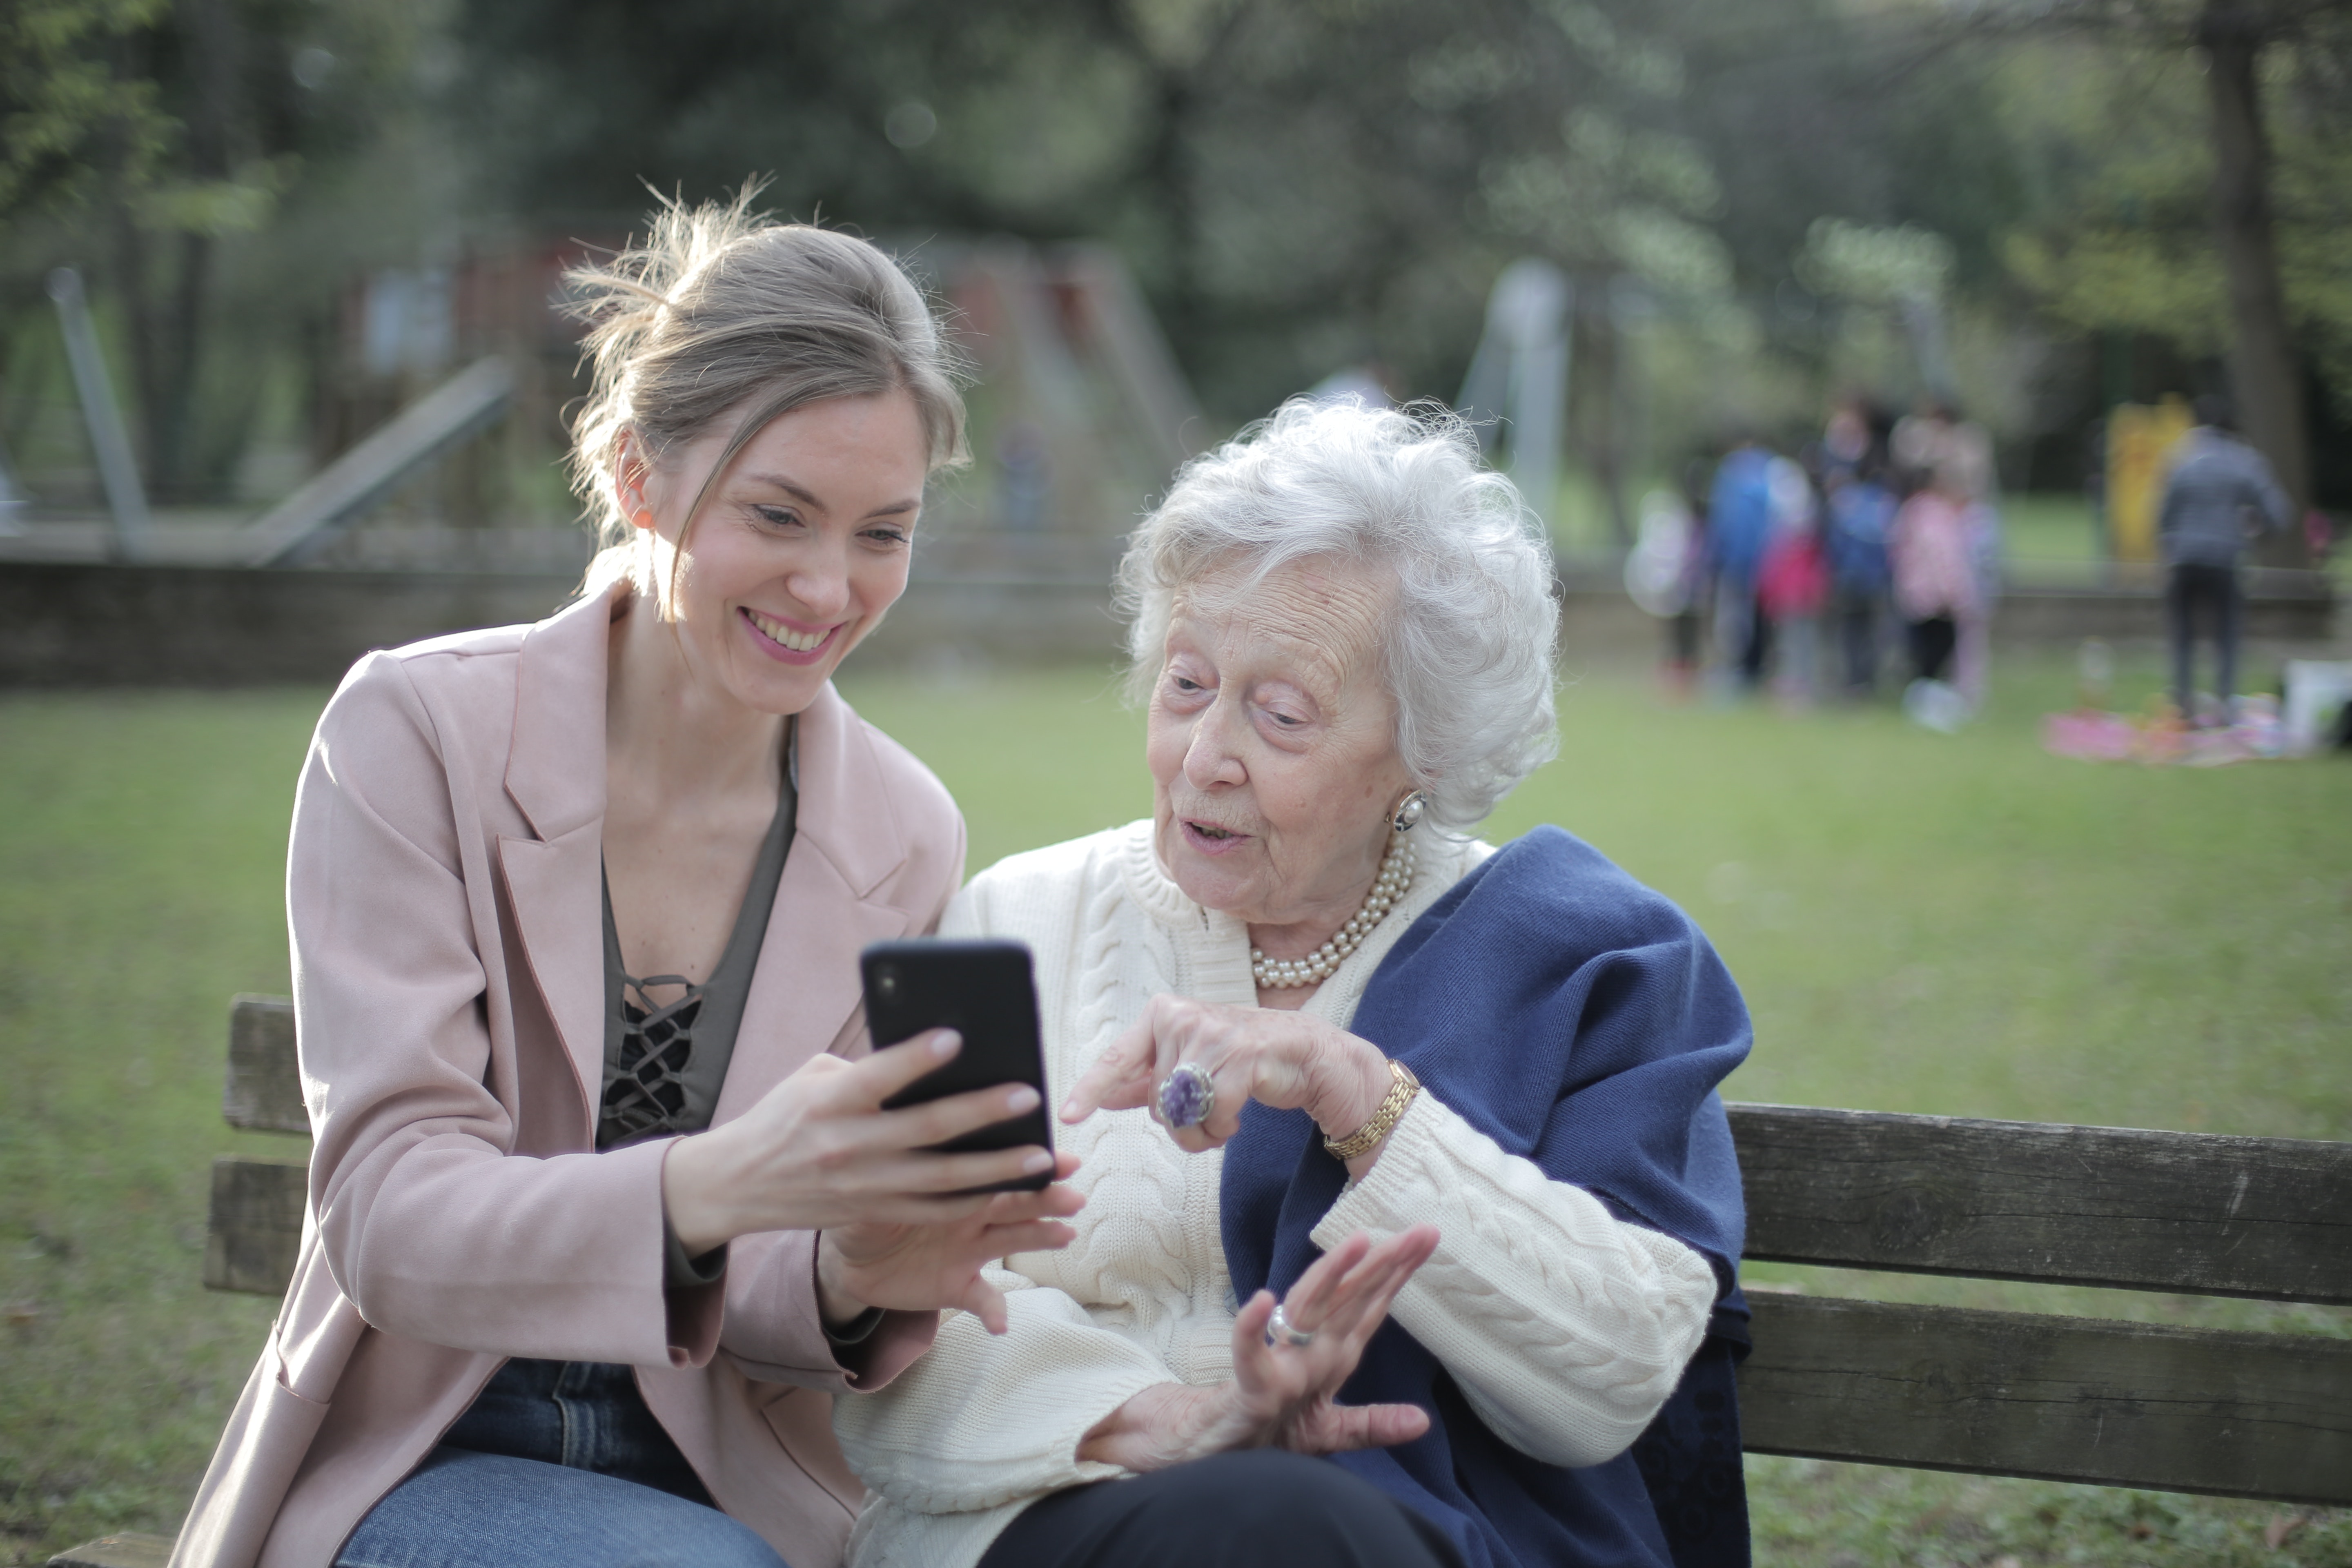 Two women enjoying senior activities for August on a park bench.